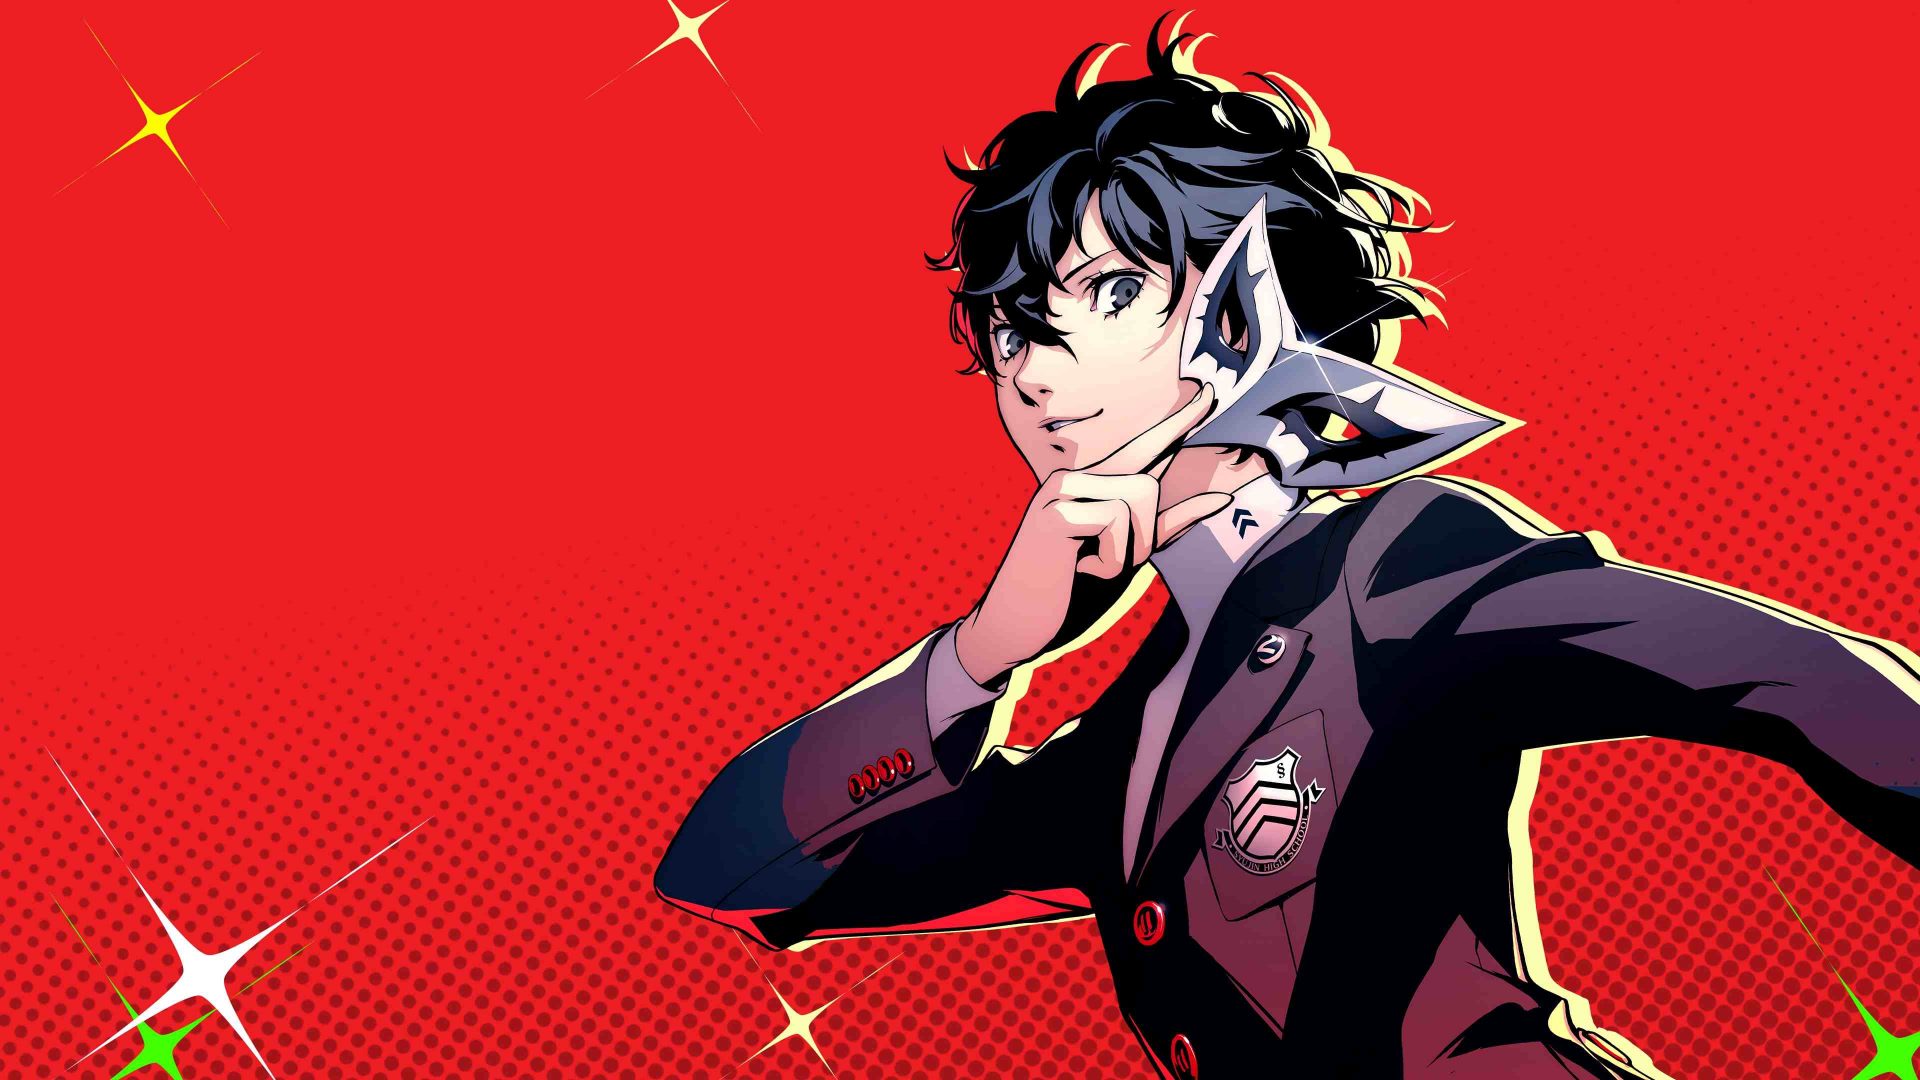 Persona 5 Royal is Nearly Perfect on Switch - REVIEW 